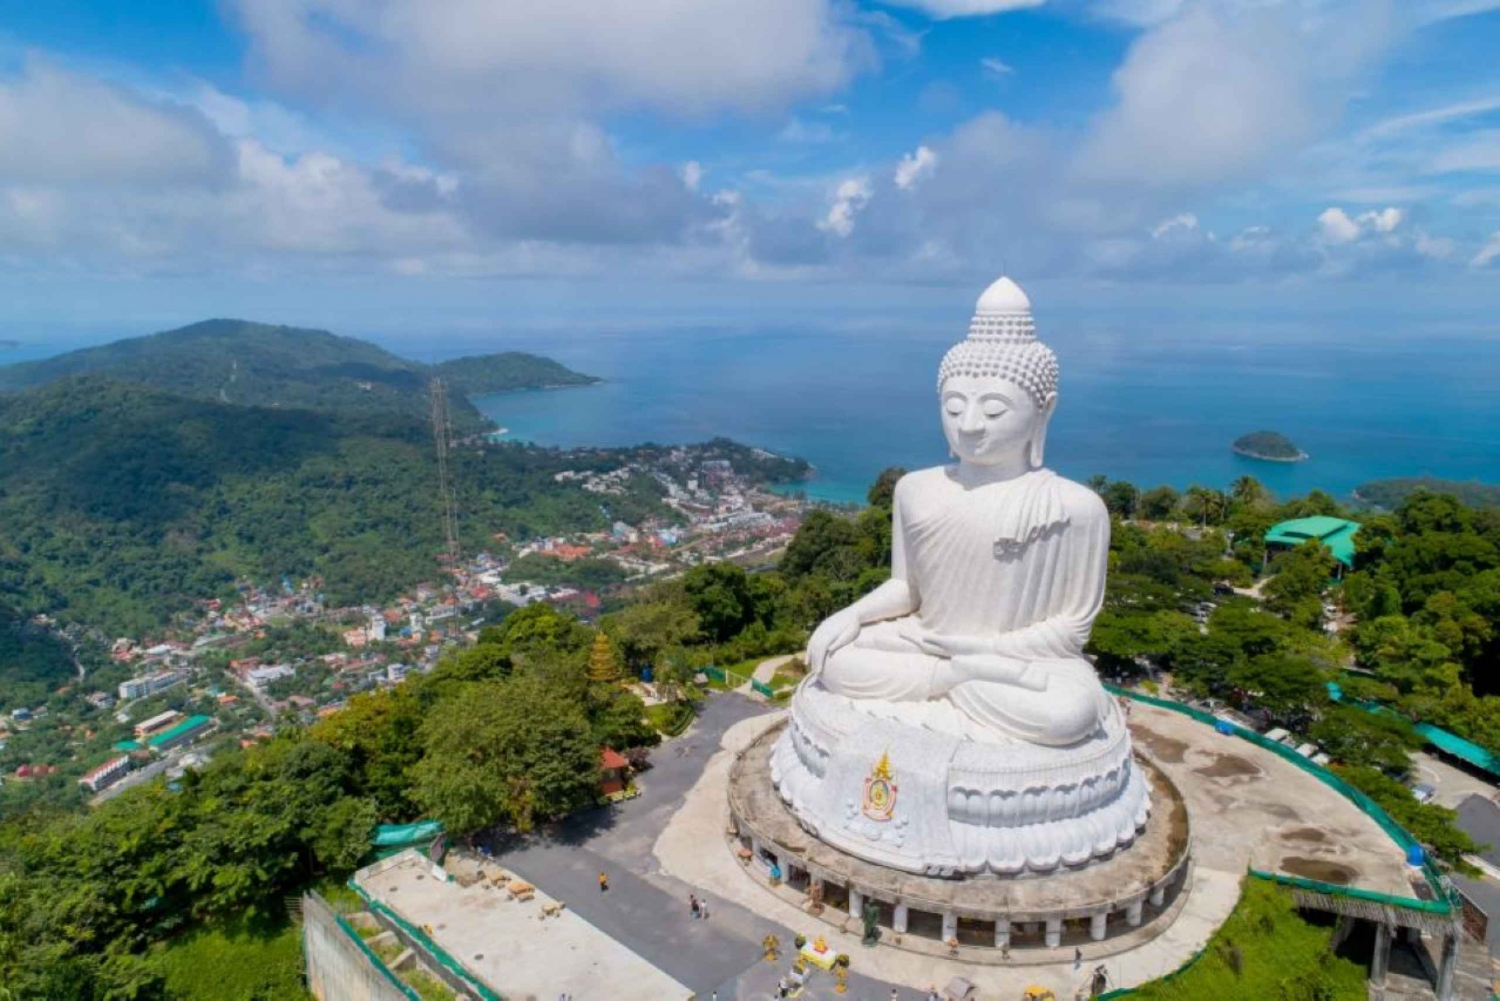 Phuket City Tour: Highlights and Viewpoints